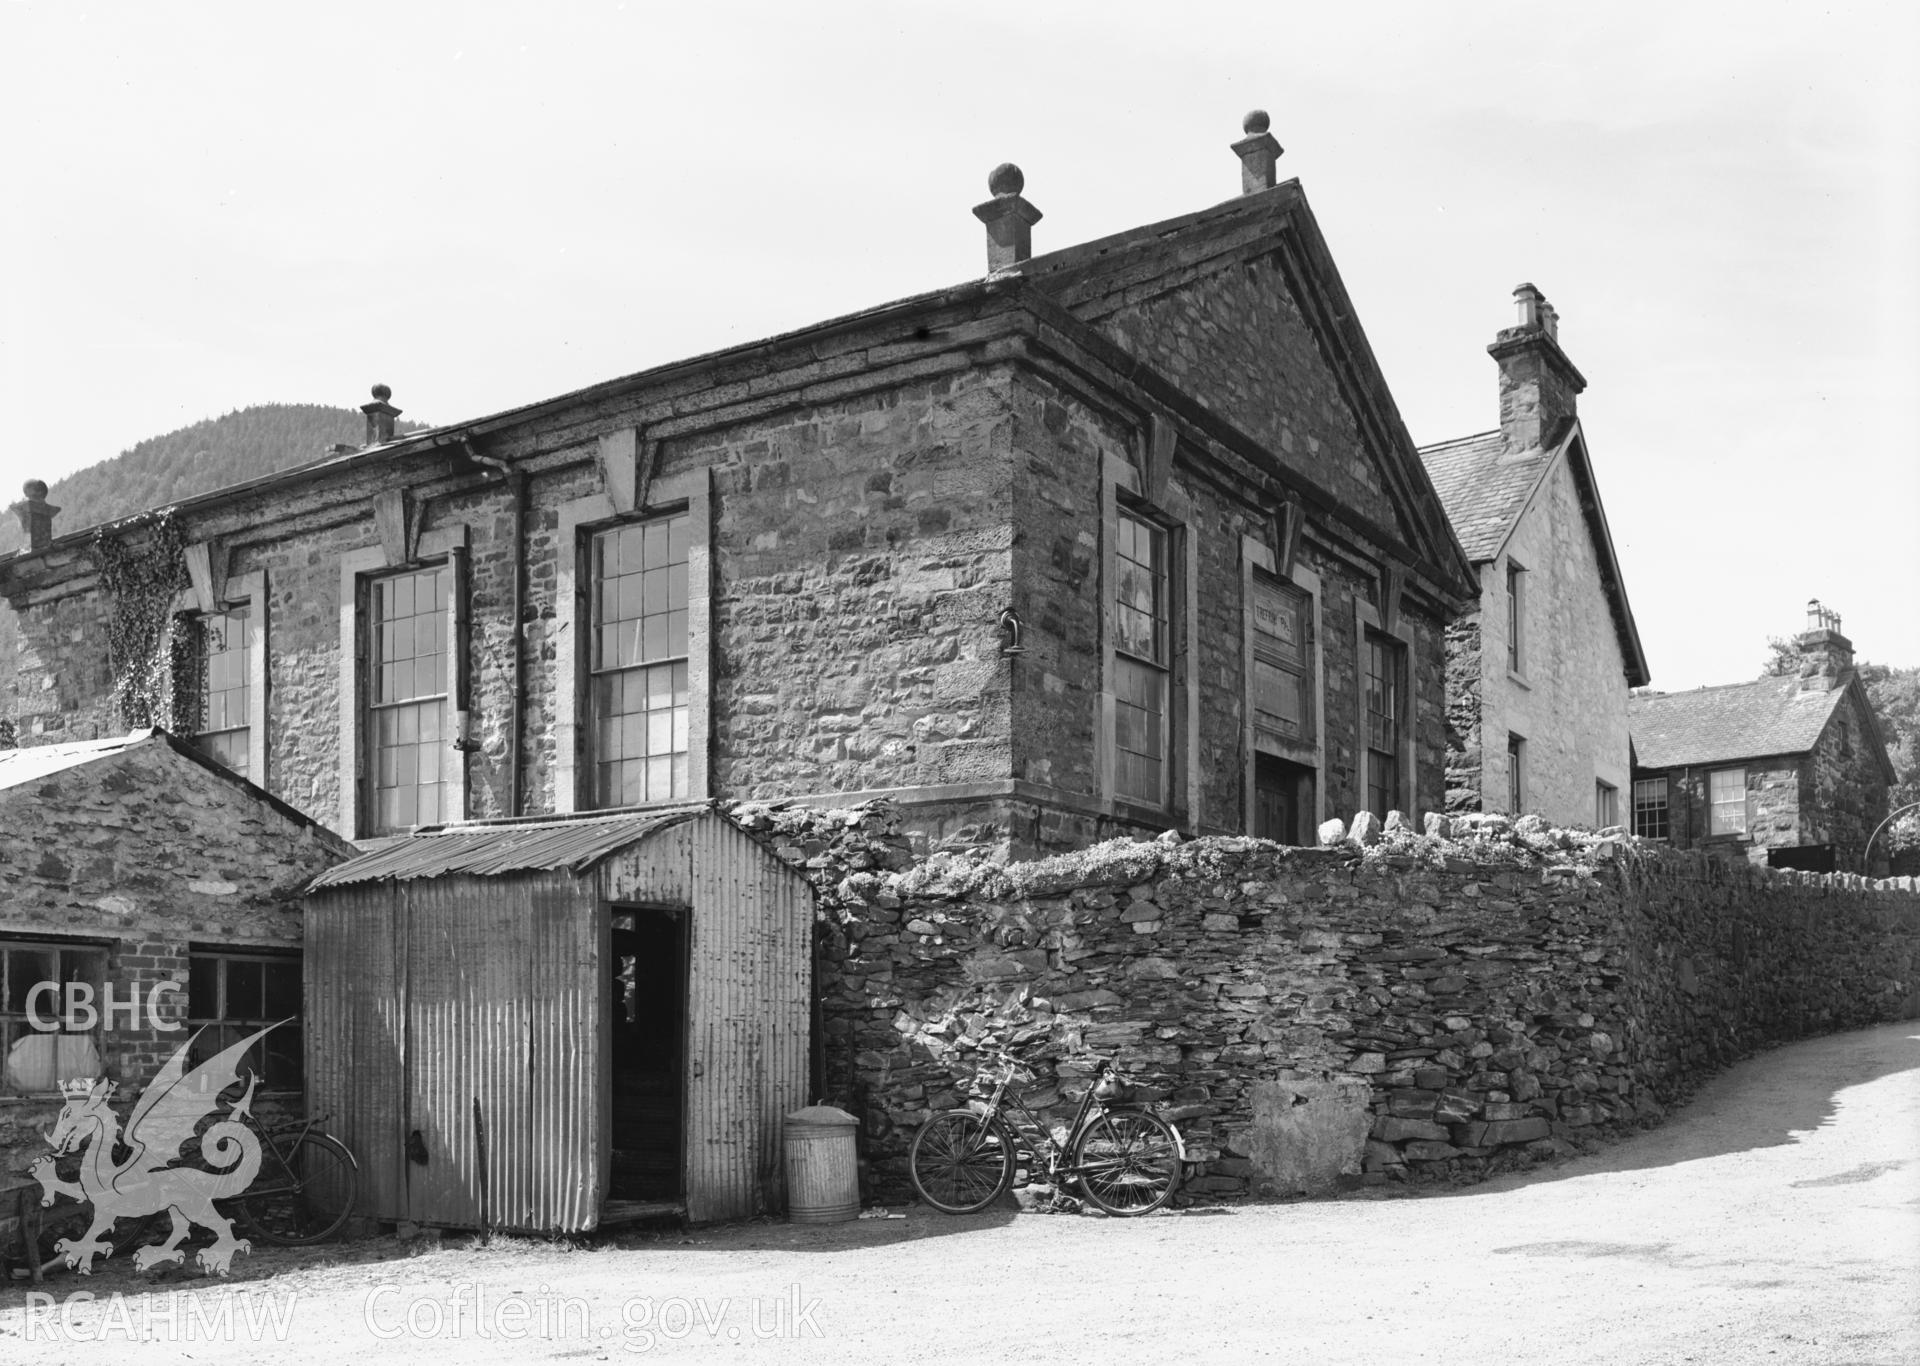 One black and white photograph showing the Town Hall.